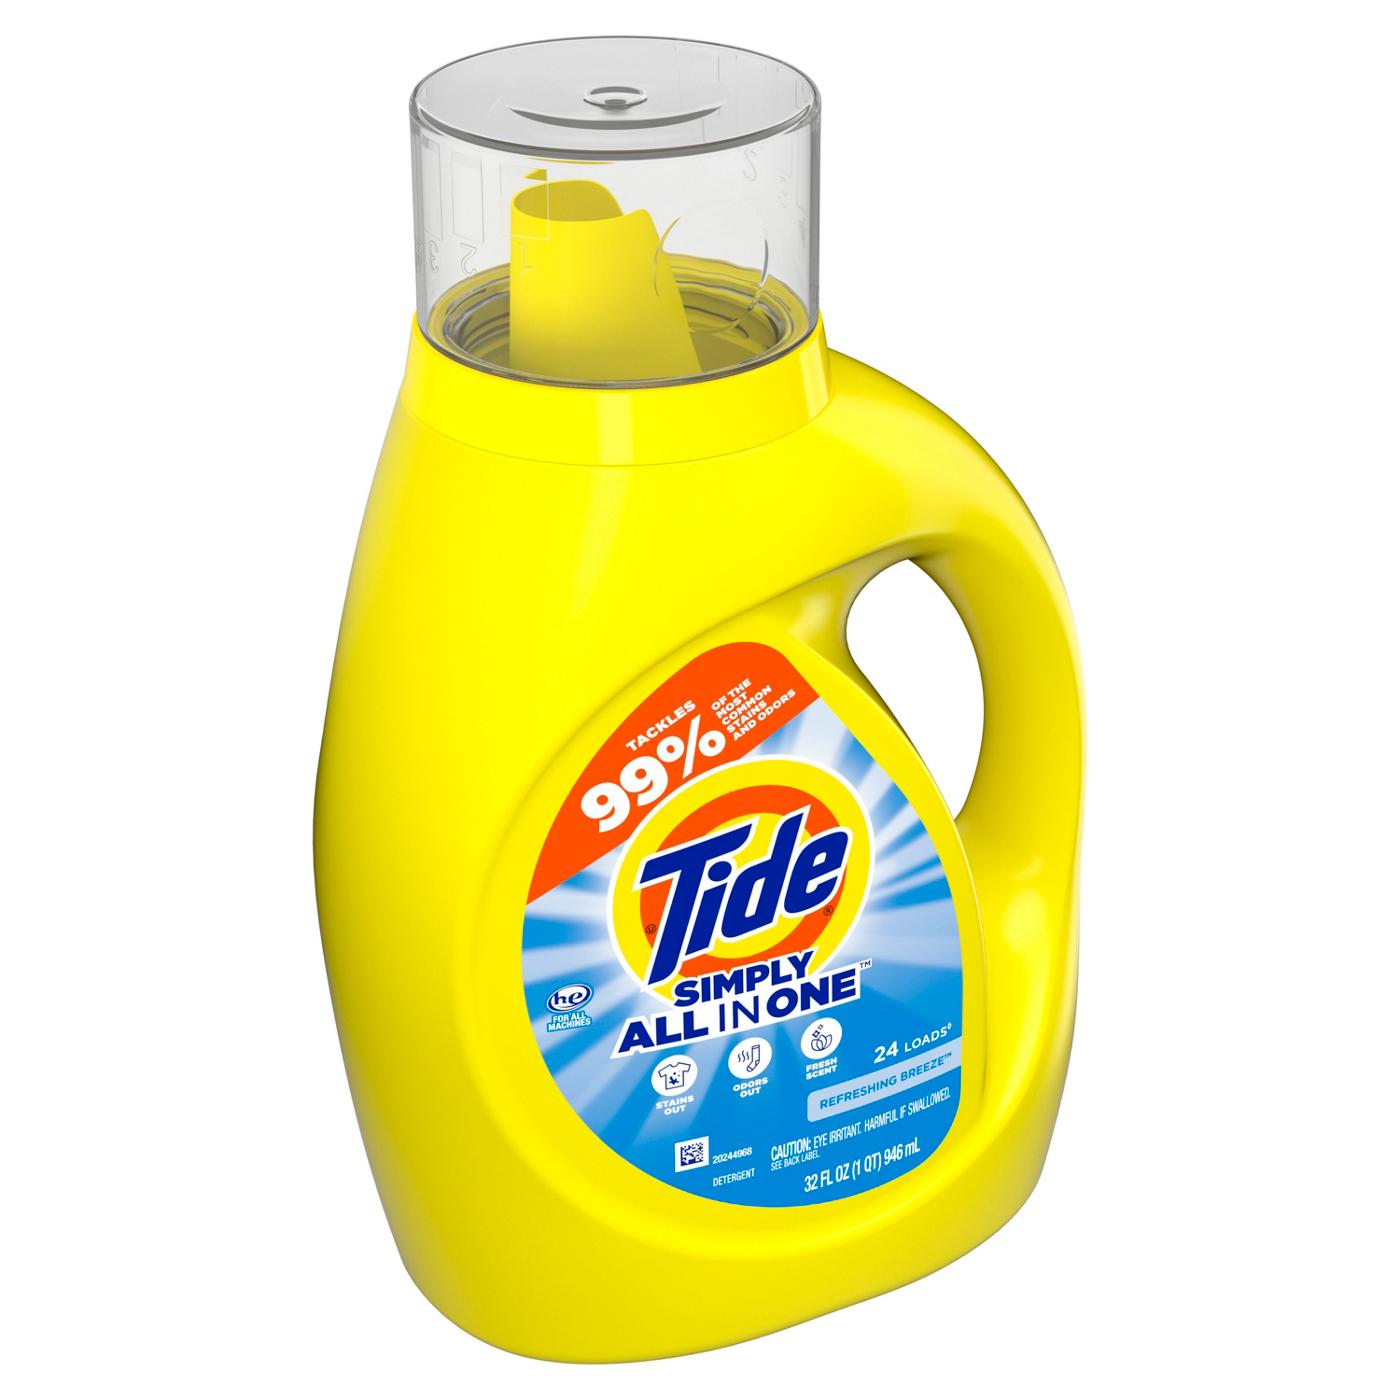 Tide Simply Clean & Fresh HE Liquid Laundry Detergent, 24 Loads - Refreshing Breeze; image 15 of 16